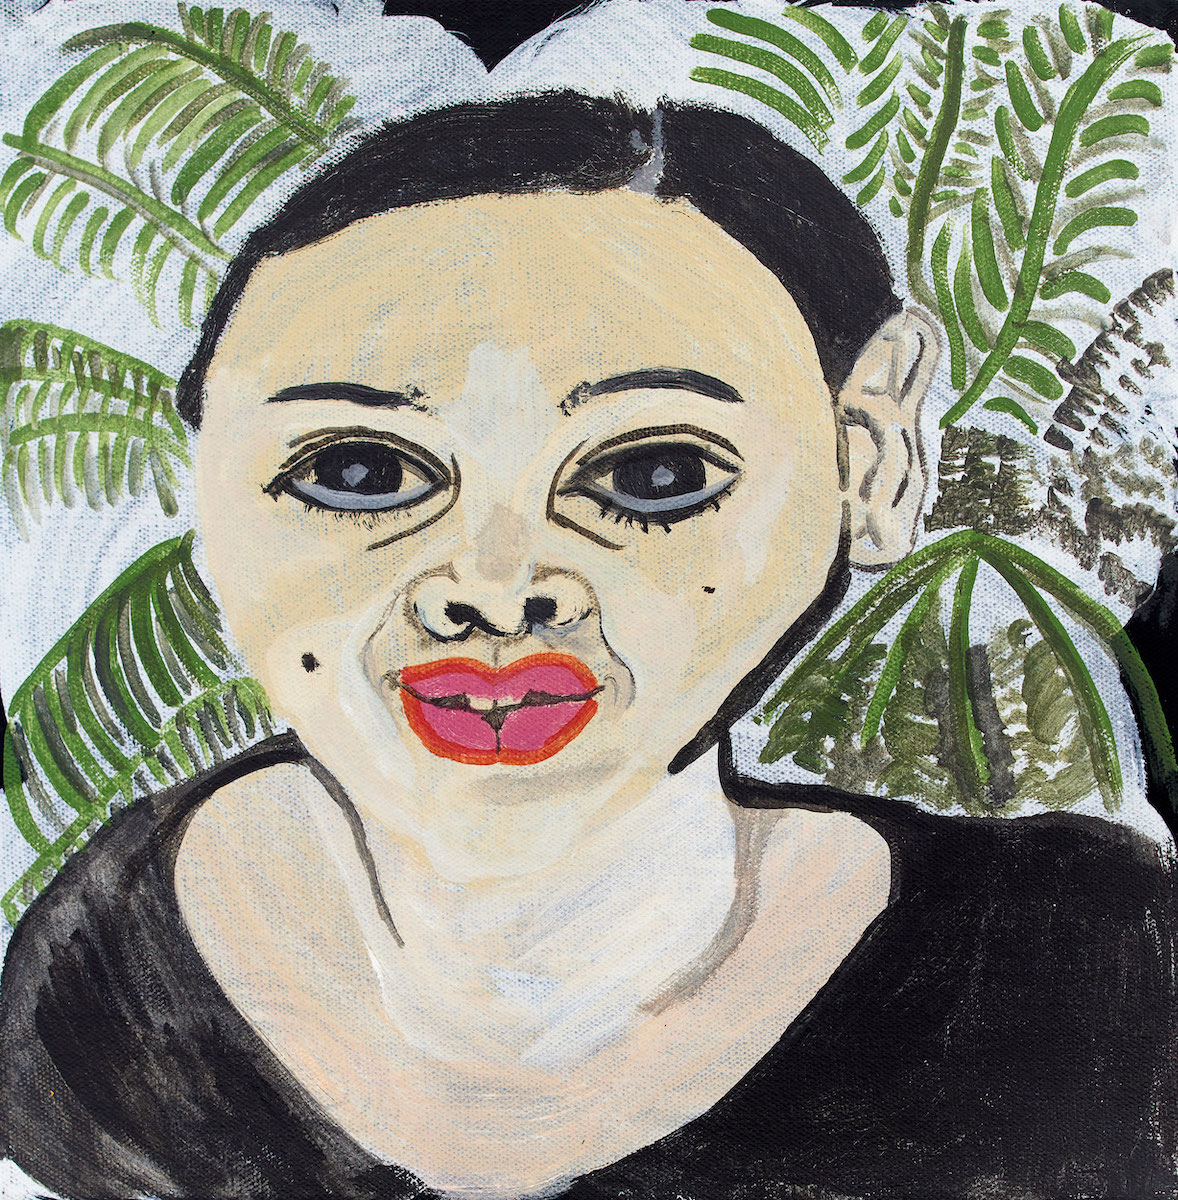 Portrait of a person with red lipstick against a white and black background with green palm fronds